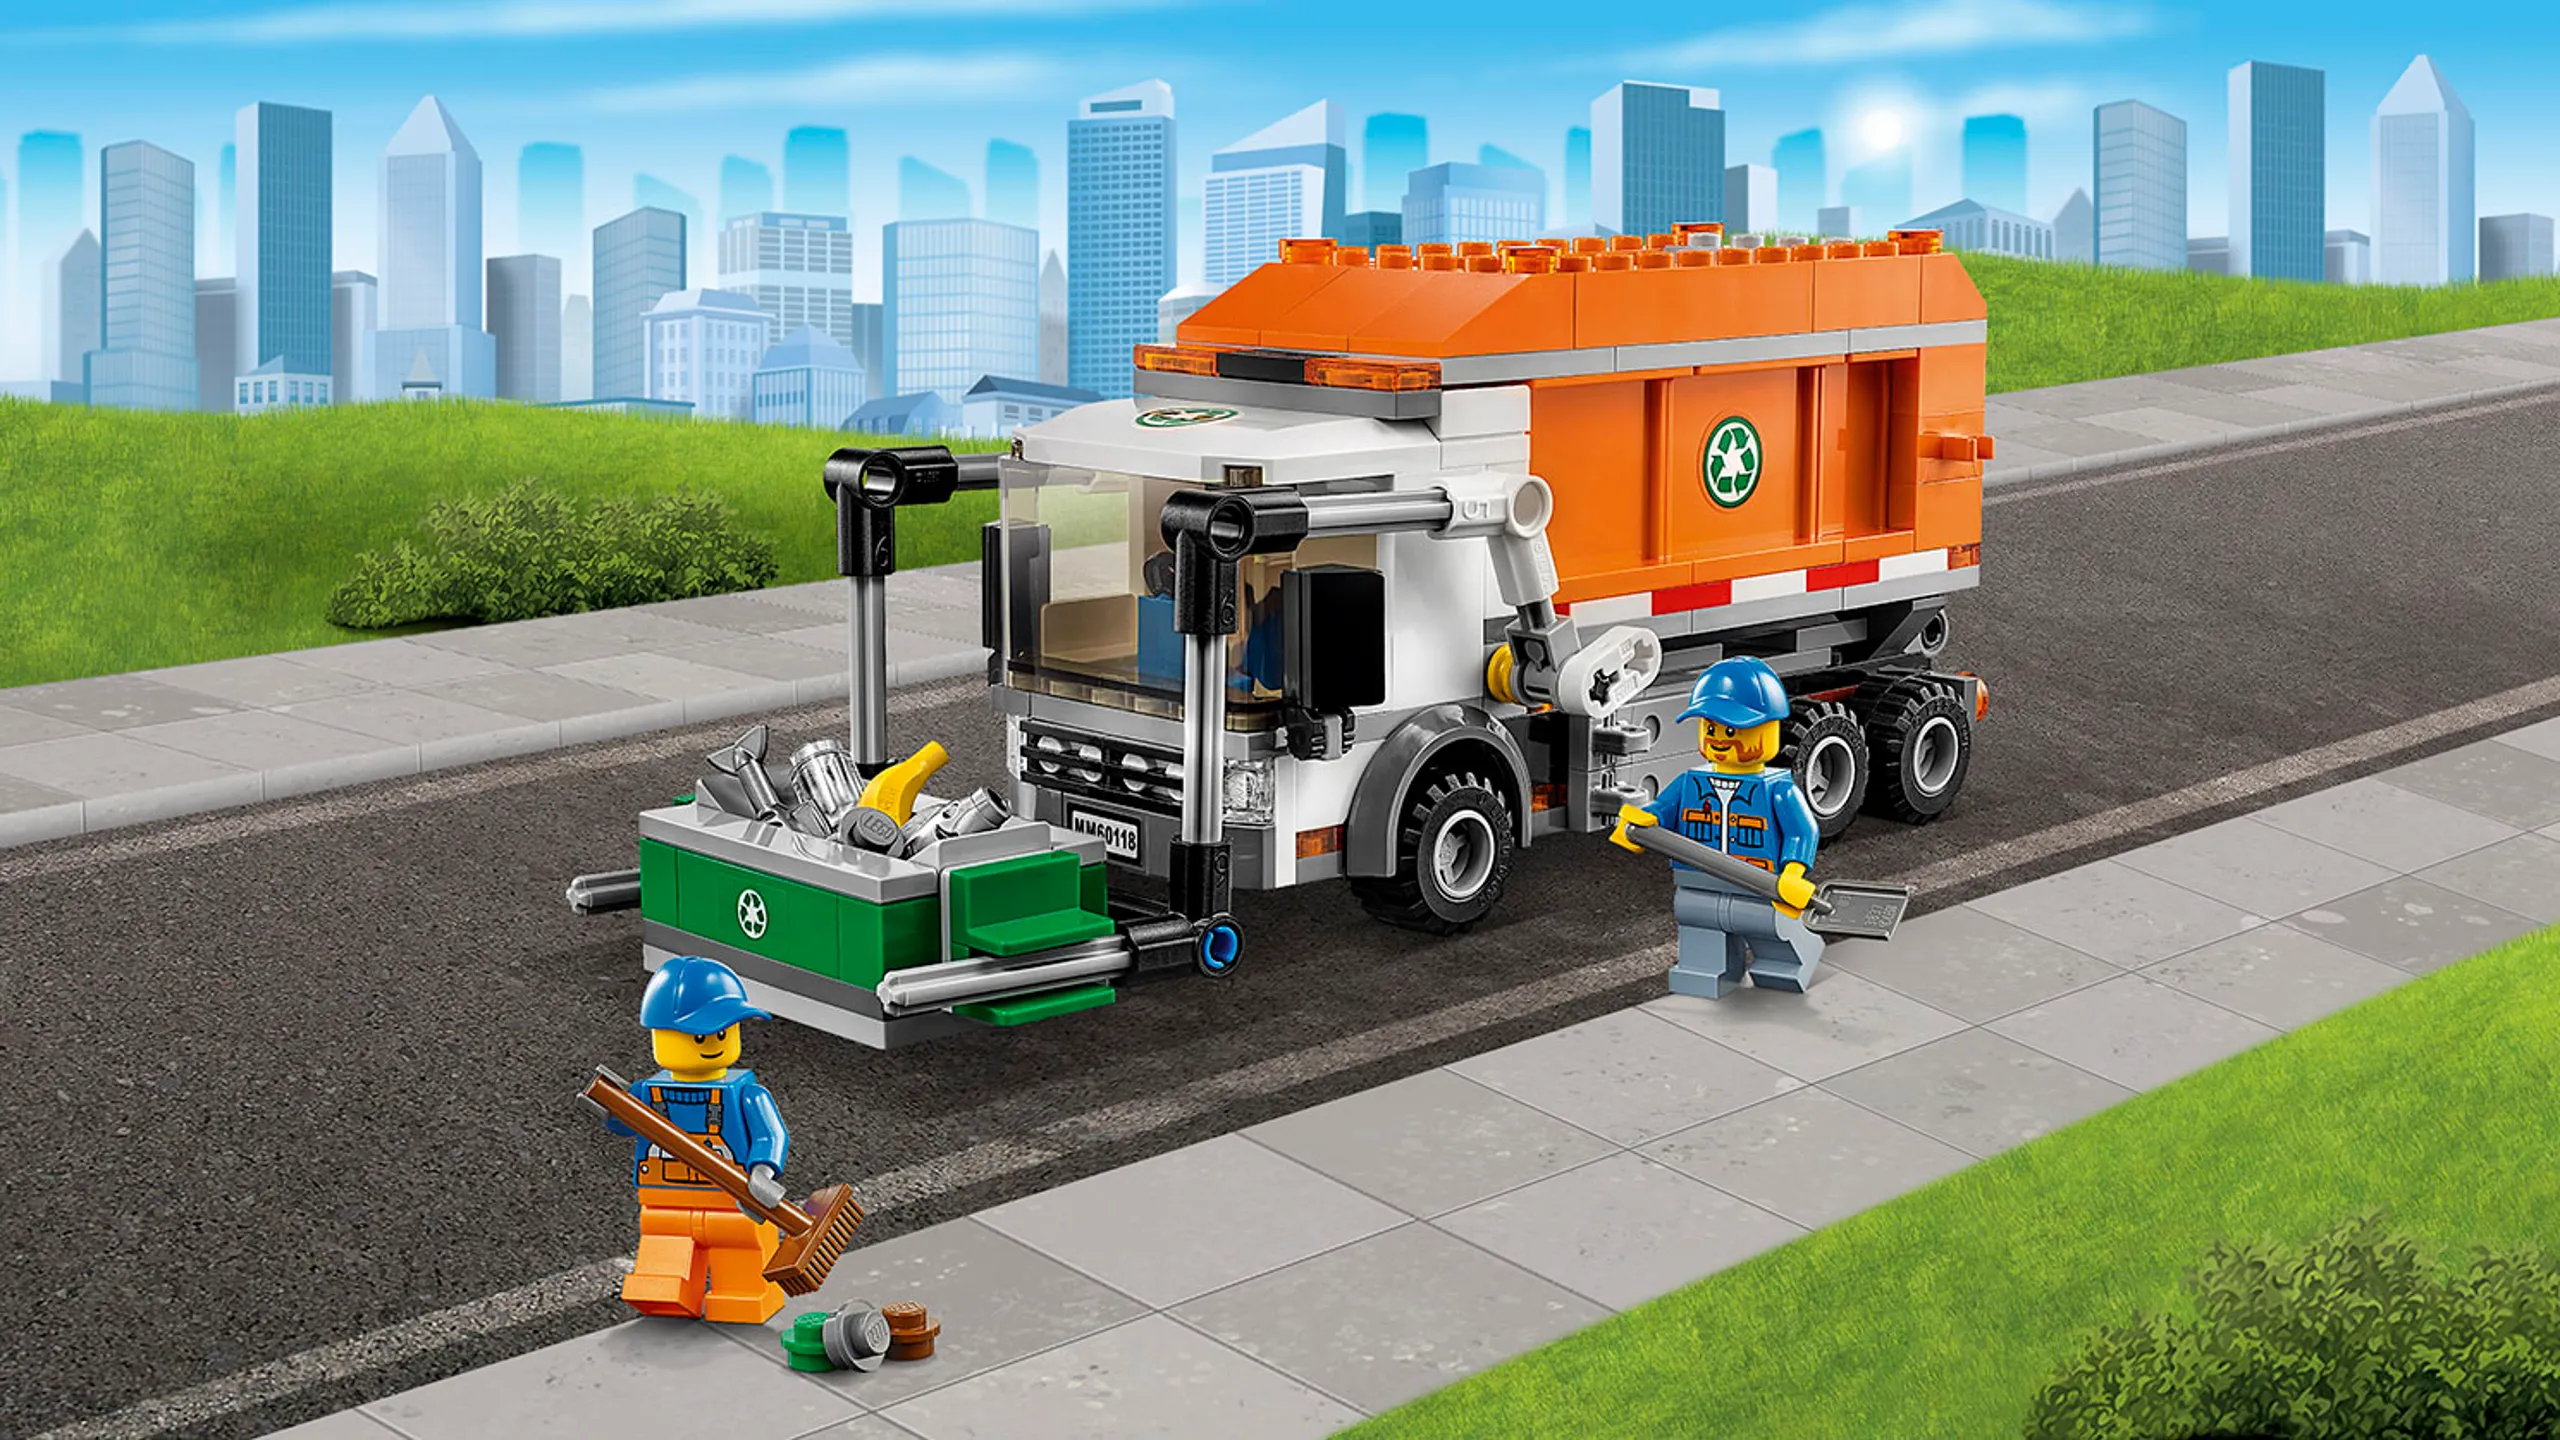 LEGO City Great Vehicles garbage truck, dumpster and minifigures – Garbage Truck 60118